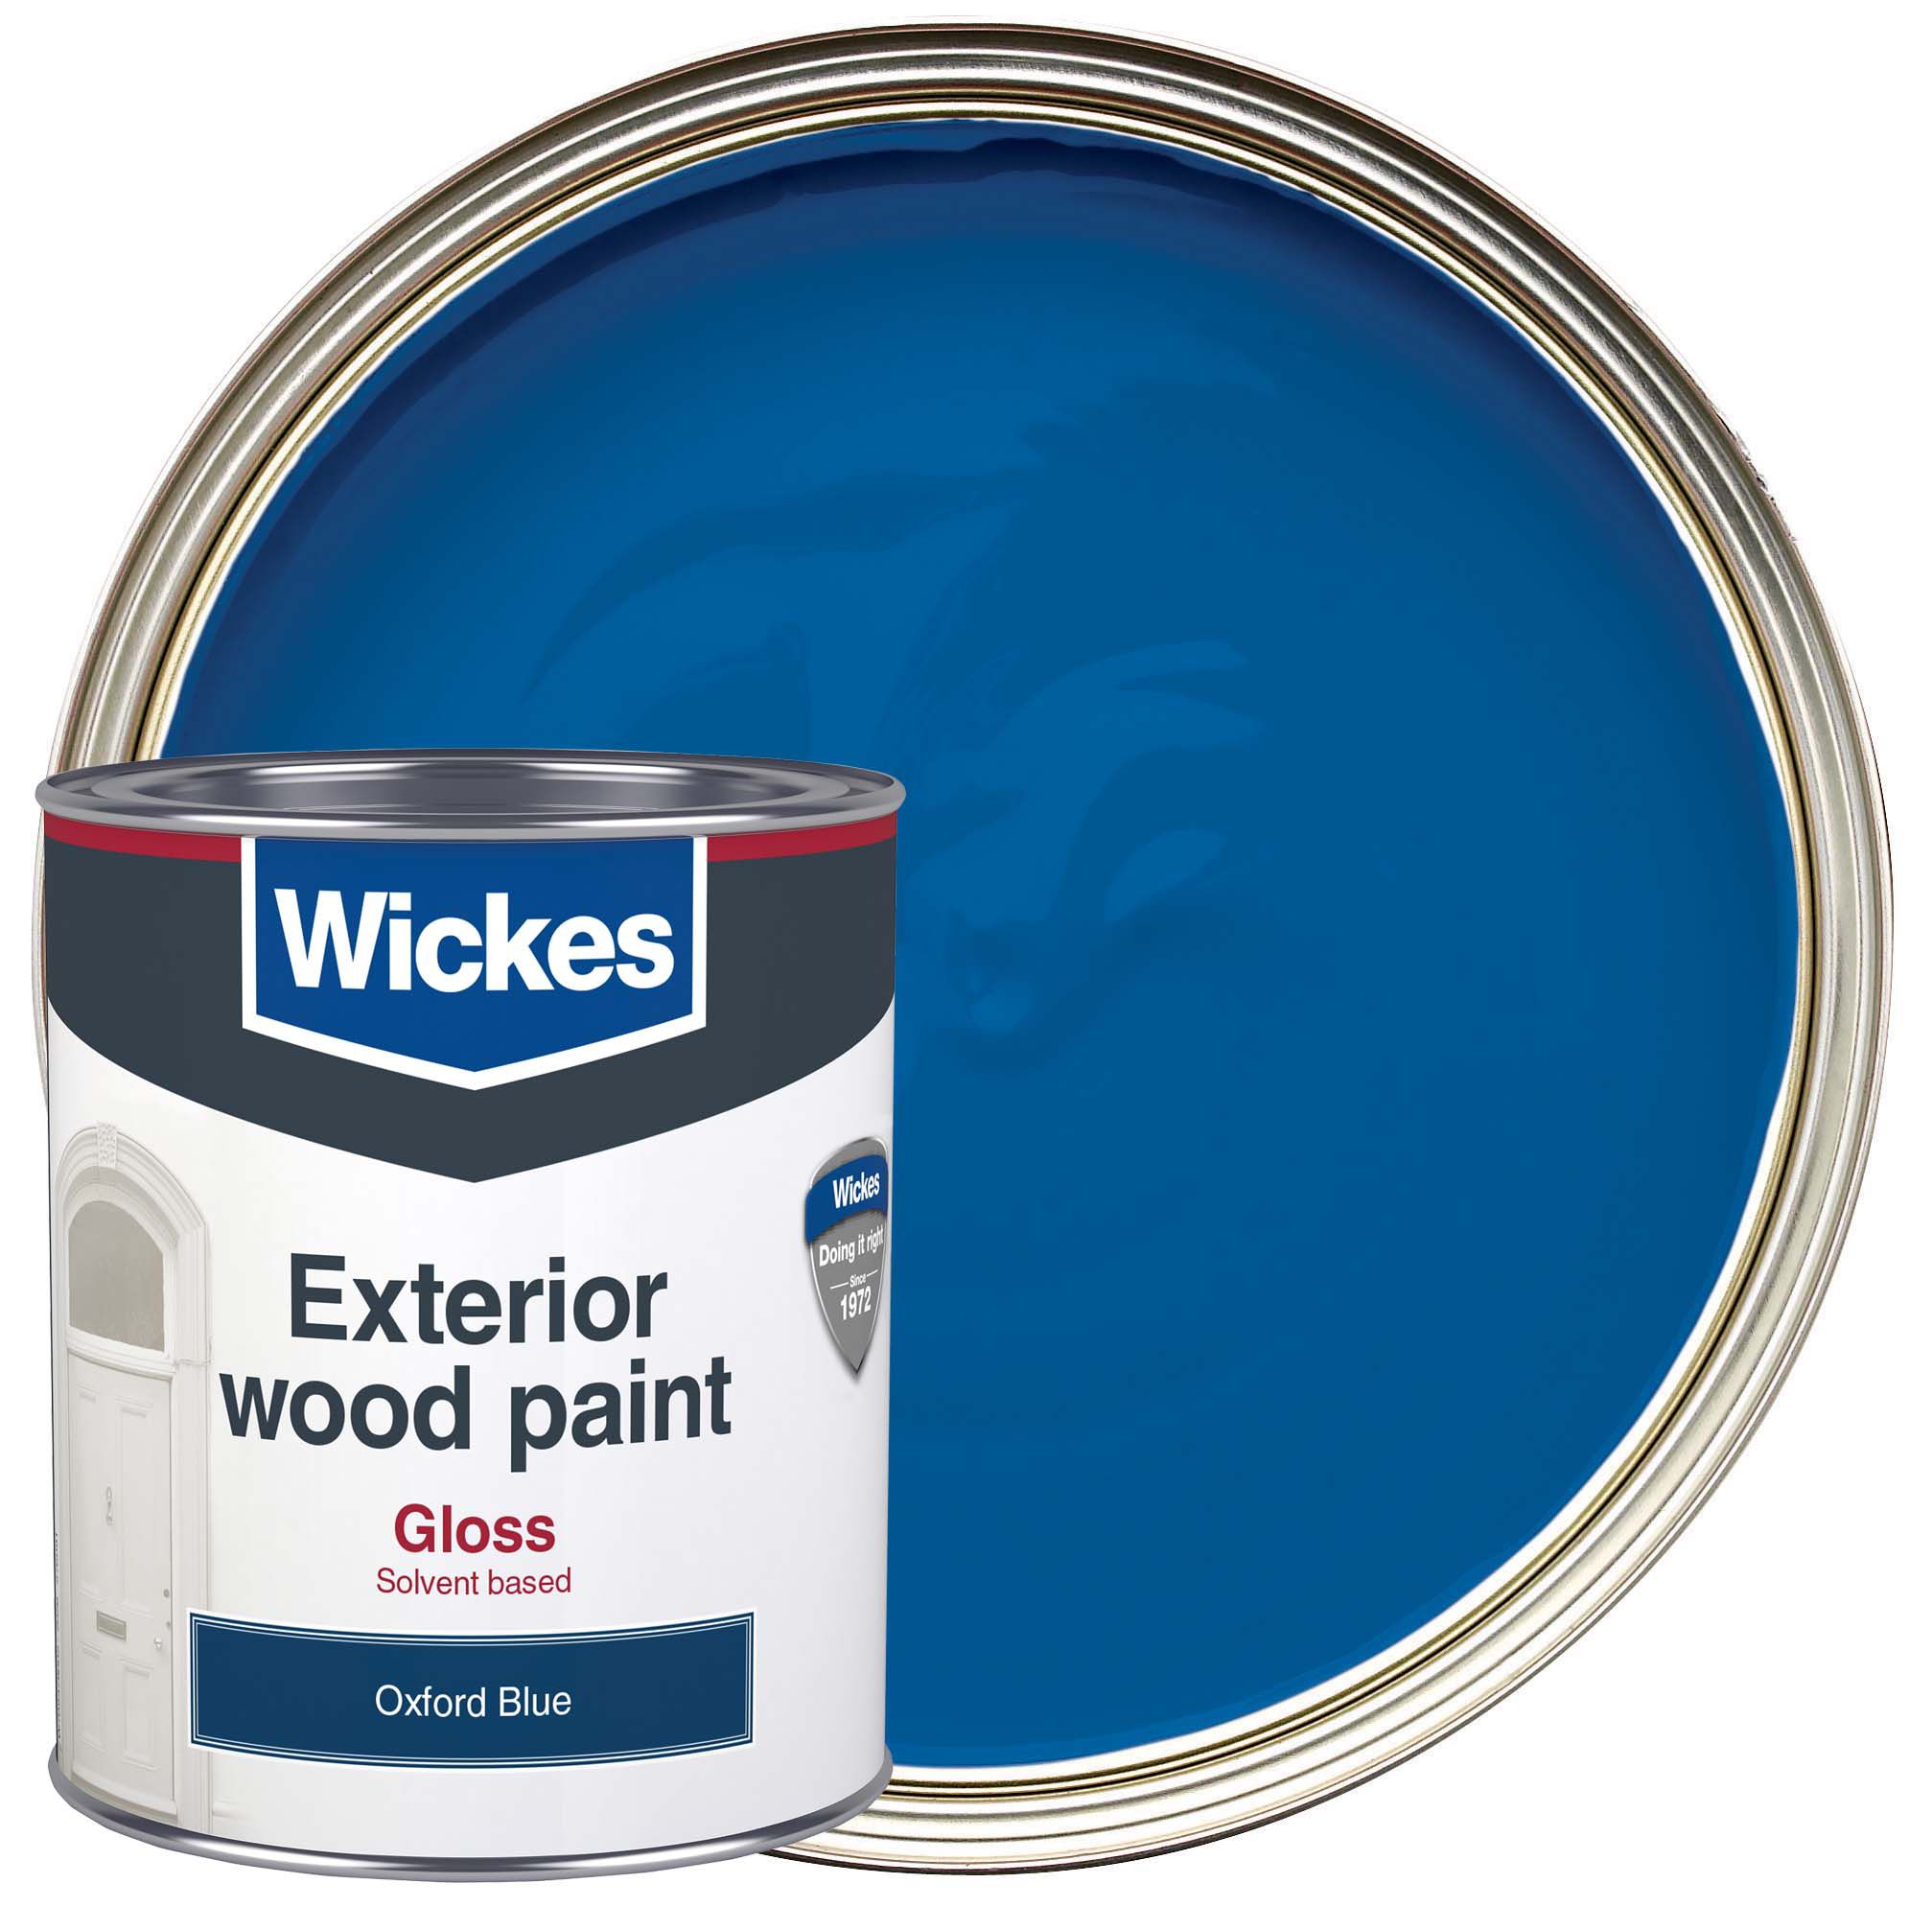 Wickes Exterior Gloss Paint - Oxford Blue - 750ml